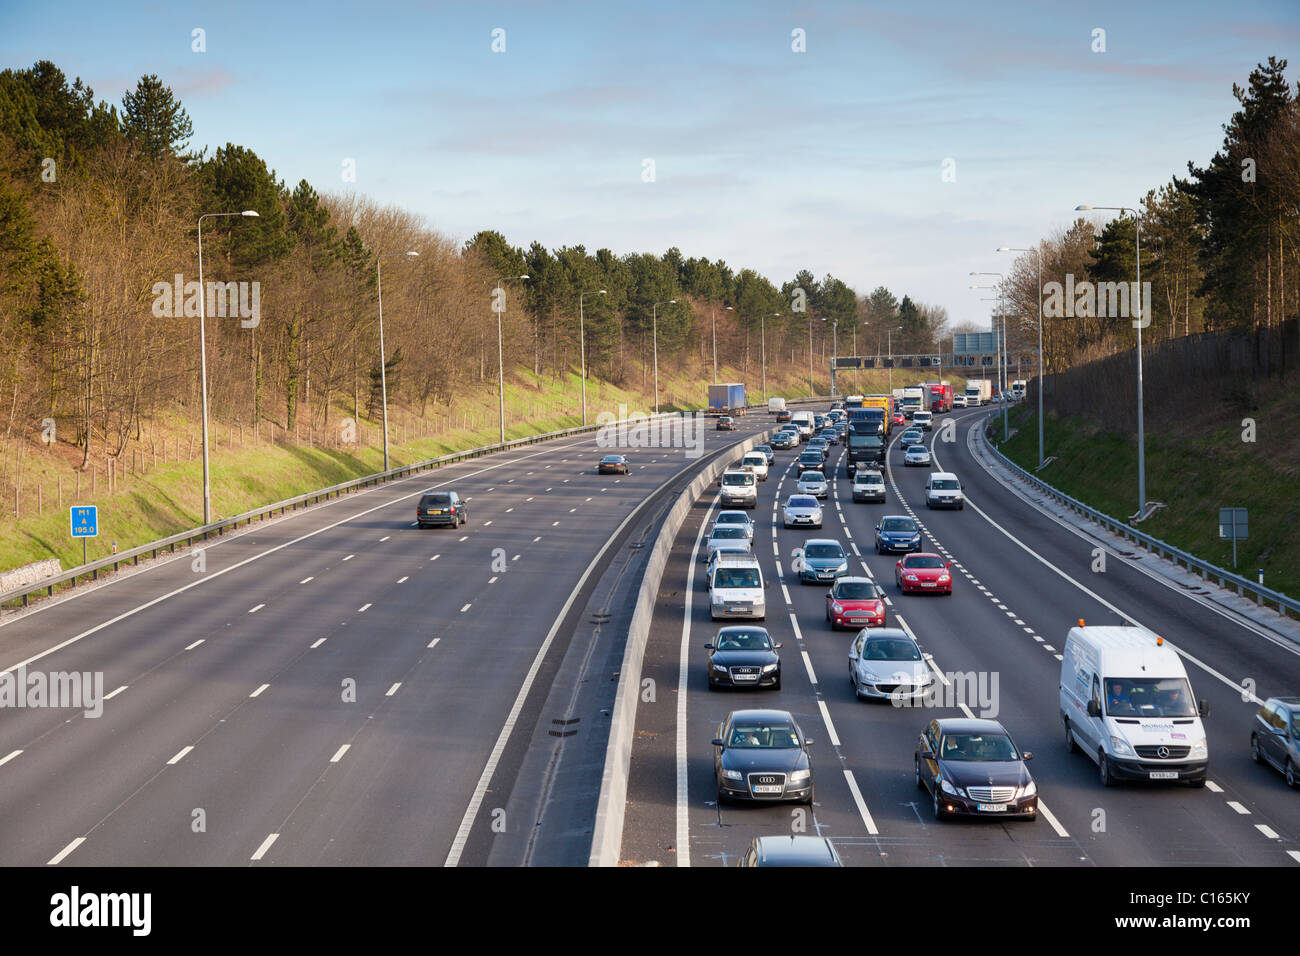 Busy monday morning traffic on the new 4 four lane section of the M1 motorway near junction 25 Nottingham England gb uk eu Stock Photo